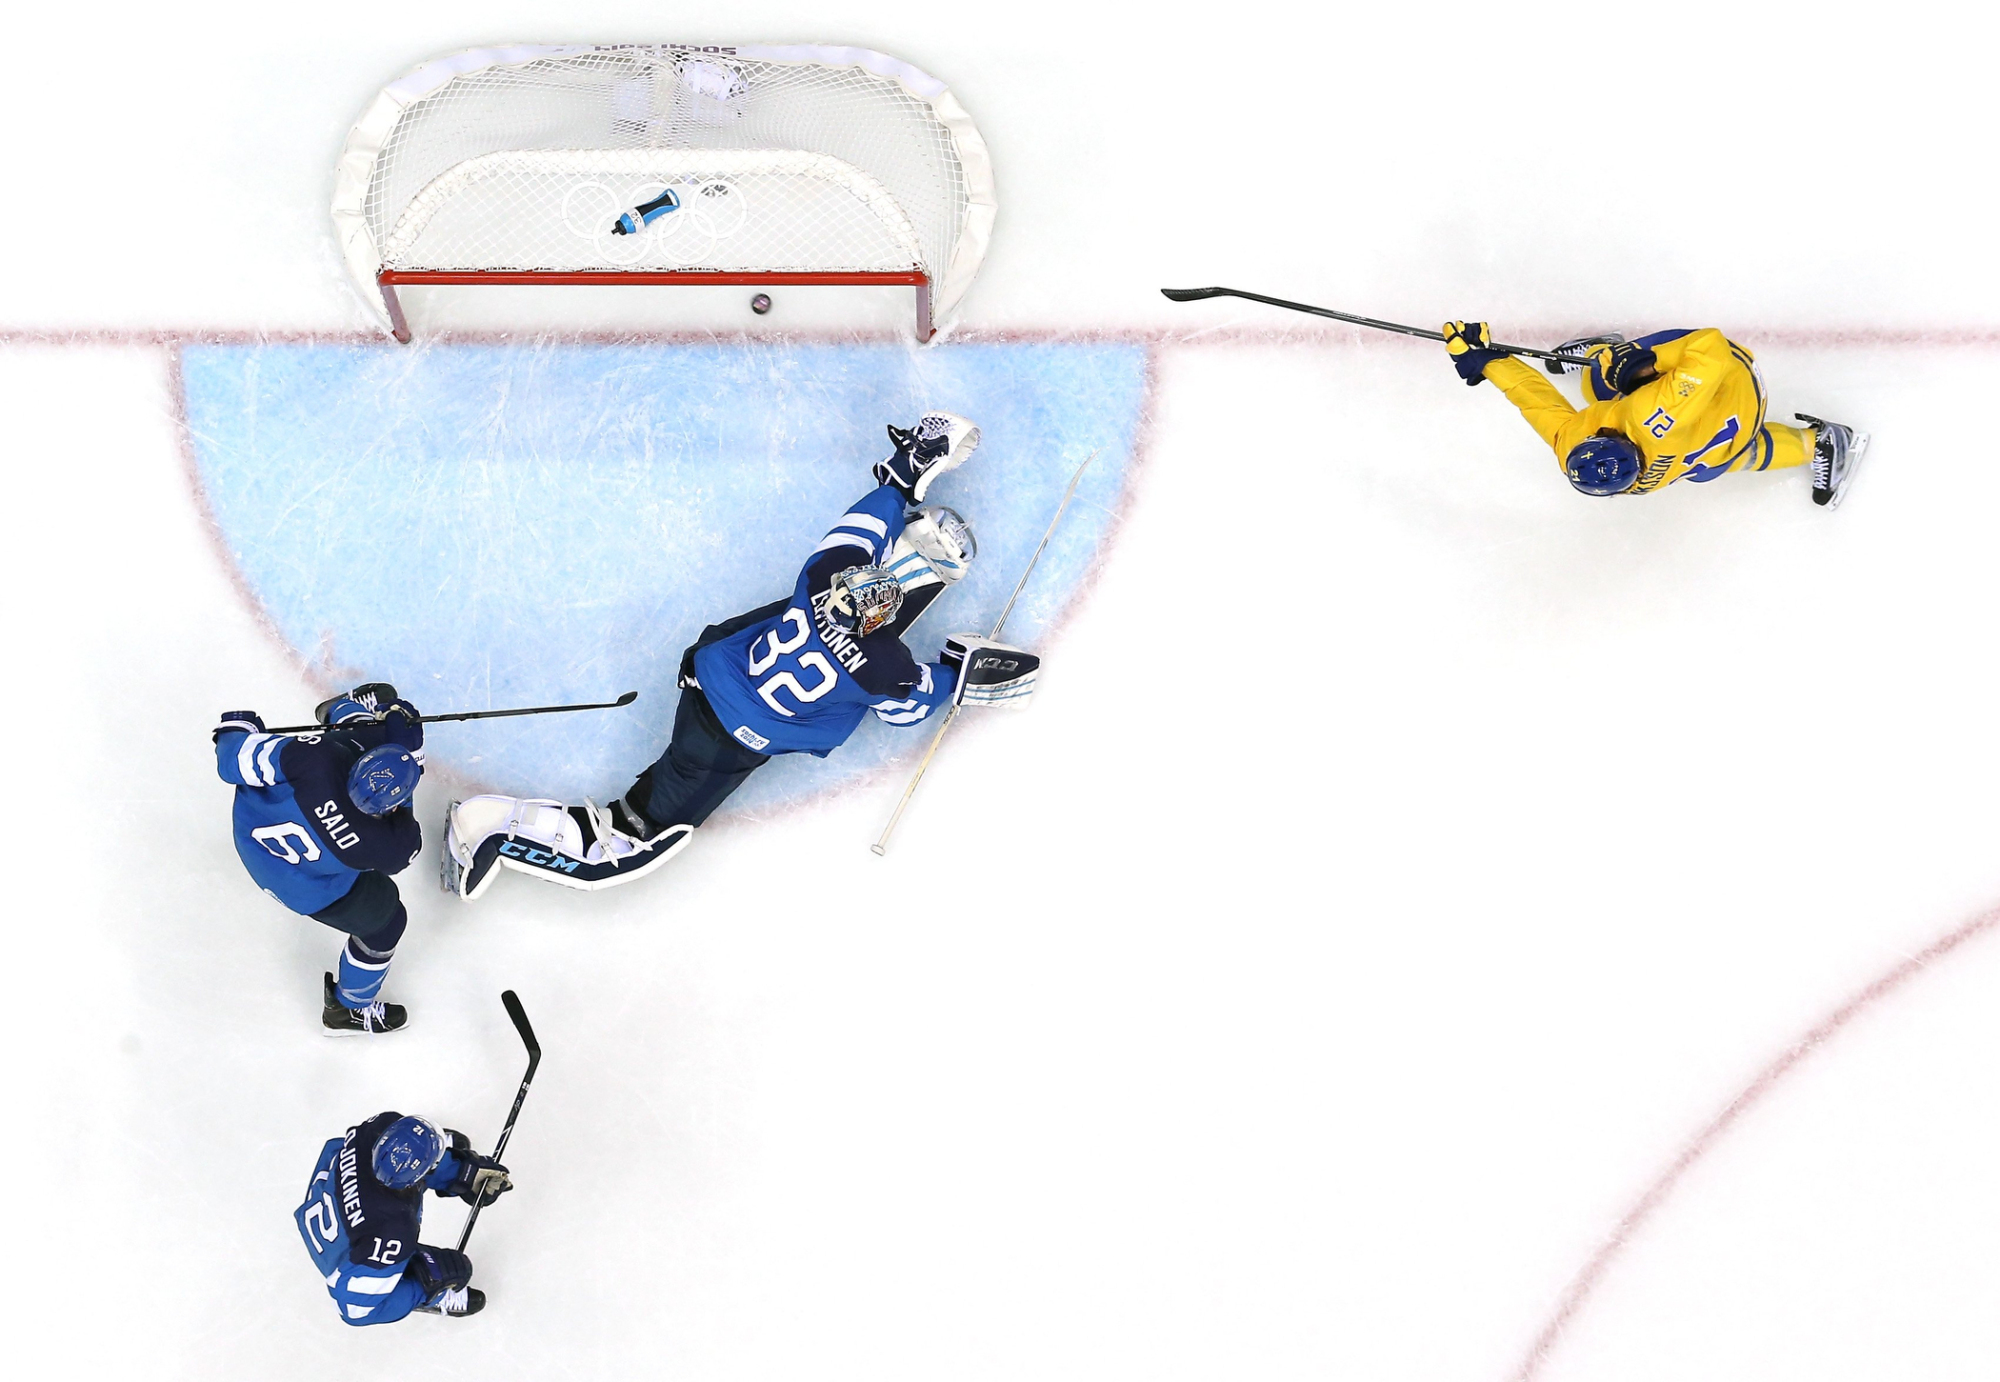 Loui Eriksson #21 of Sweden scores a scoend-period goal against Kari Lehtonen #32 of Finland during the Men's Ice Hockey Semifinal Playoff .